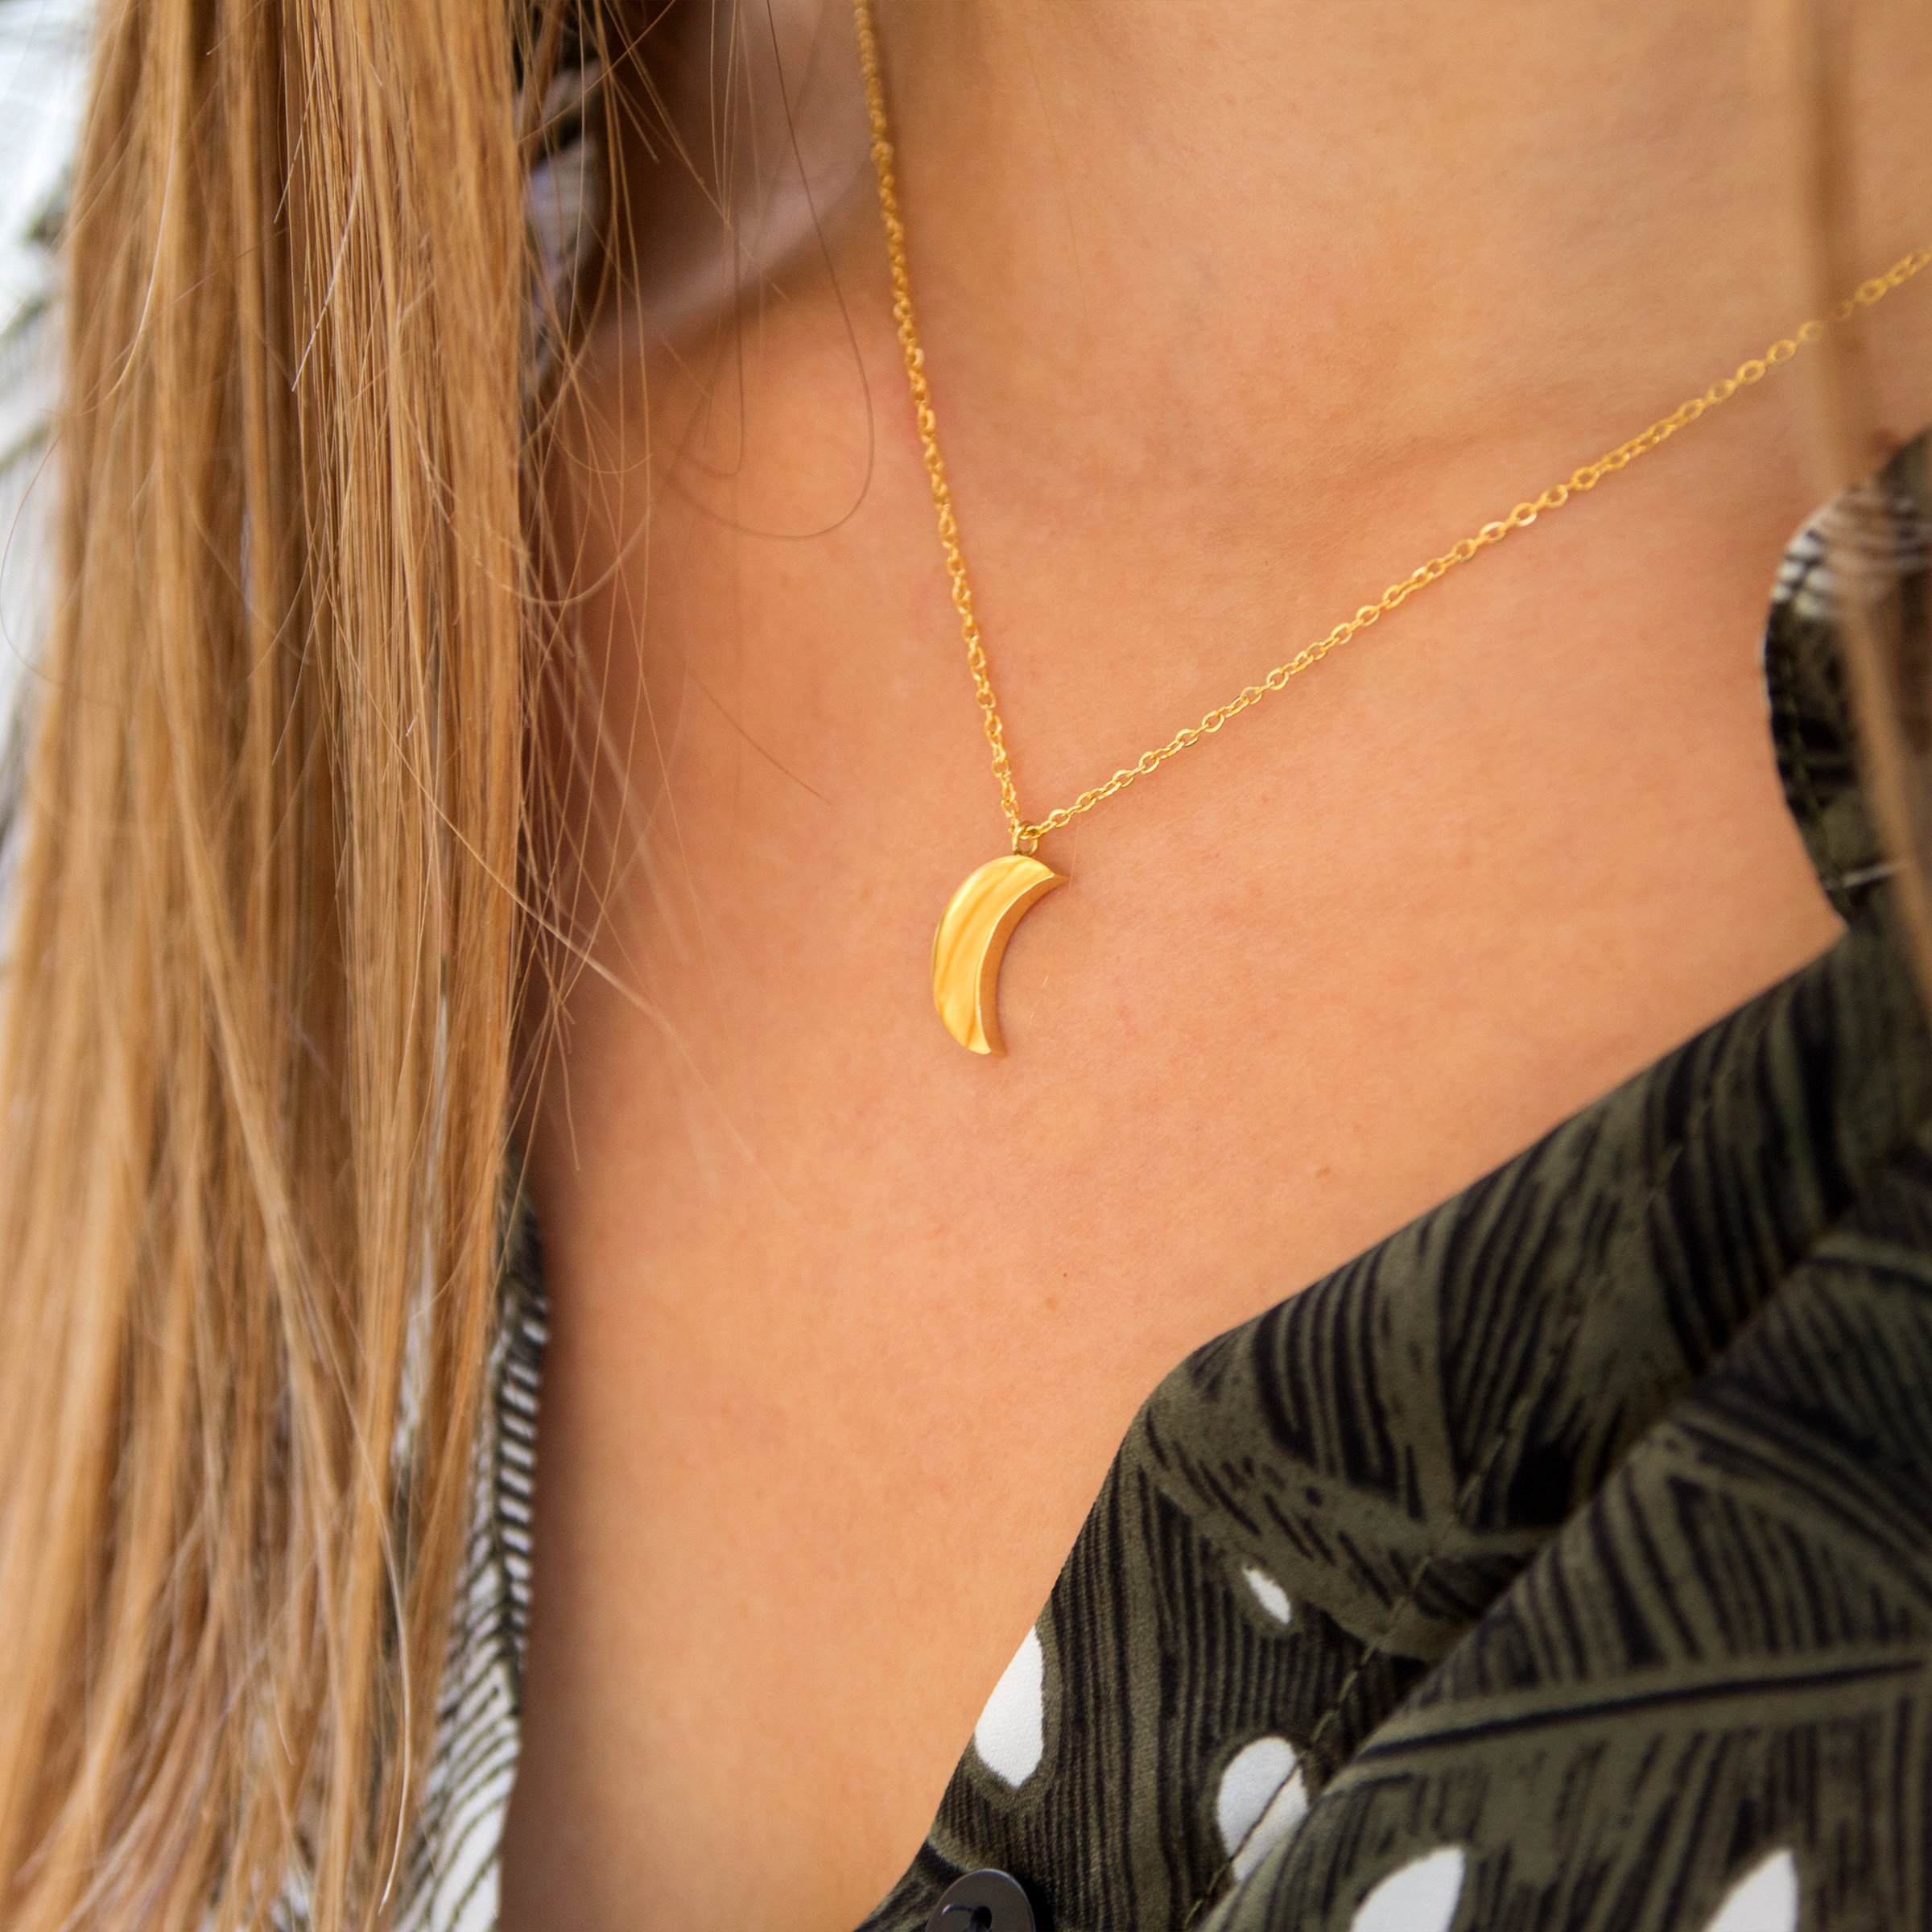 Kuku gold crescent moon necklace on model